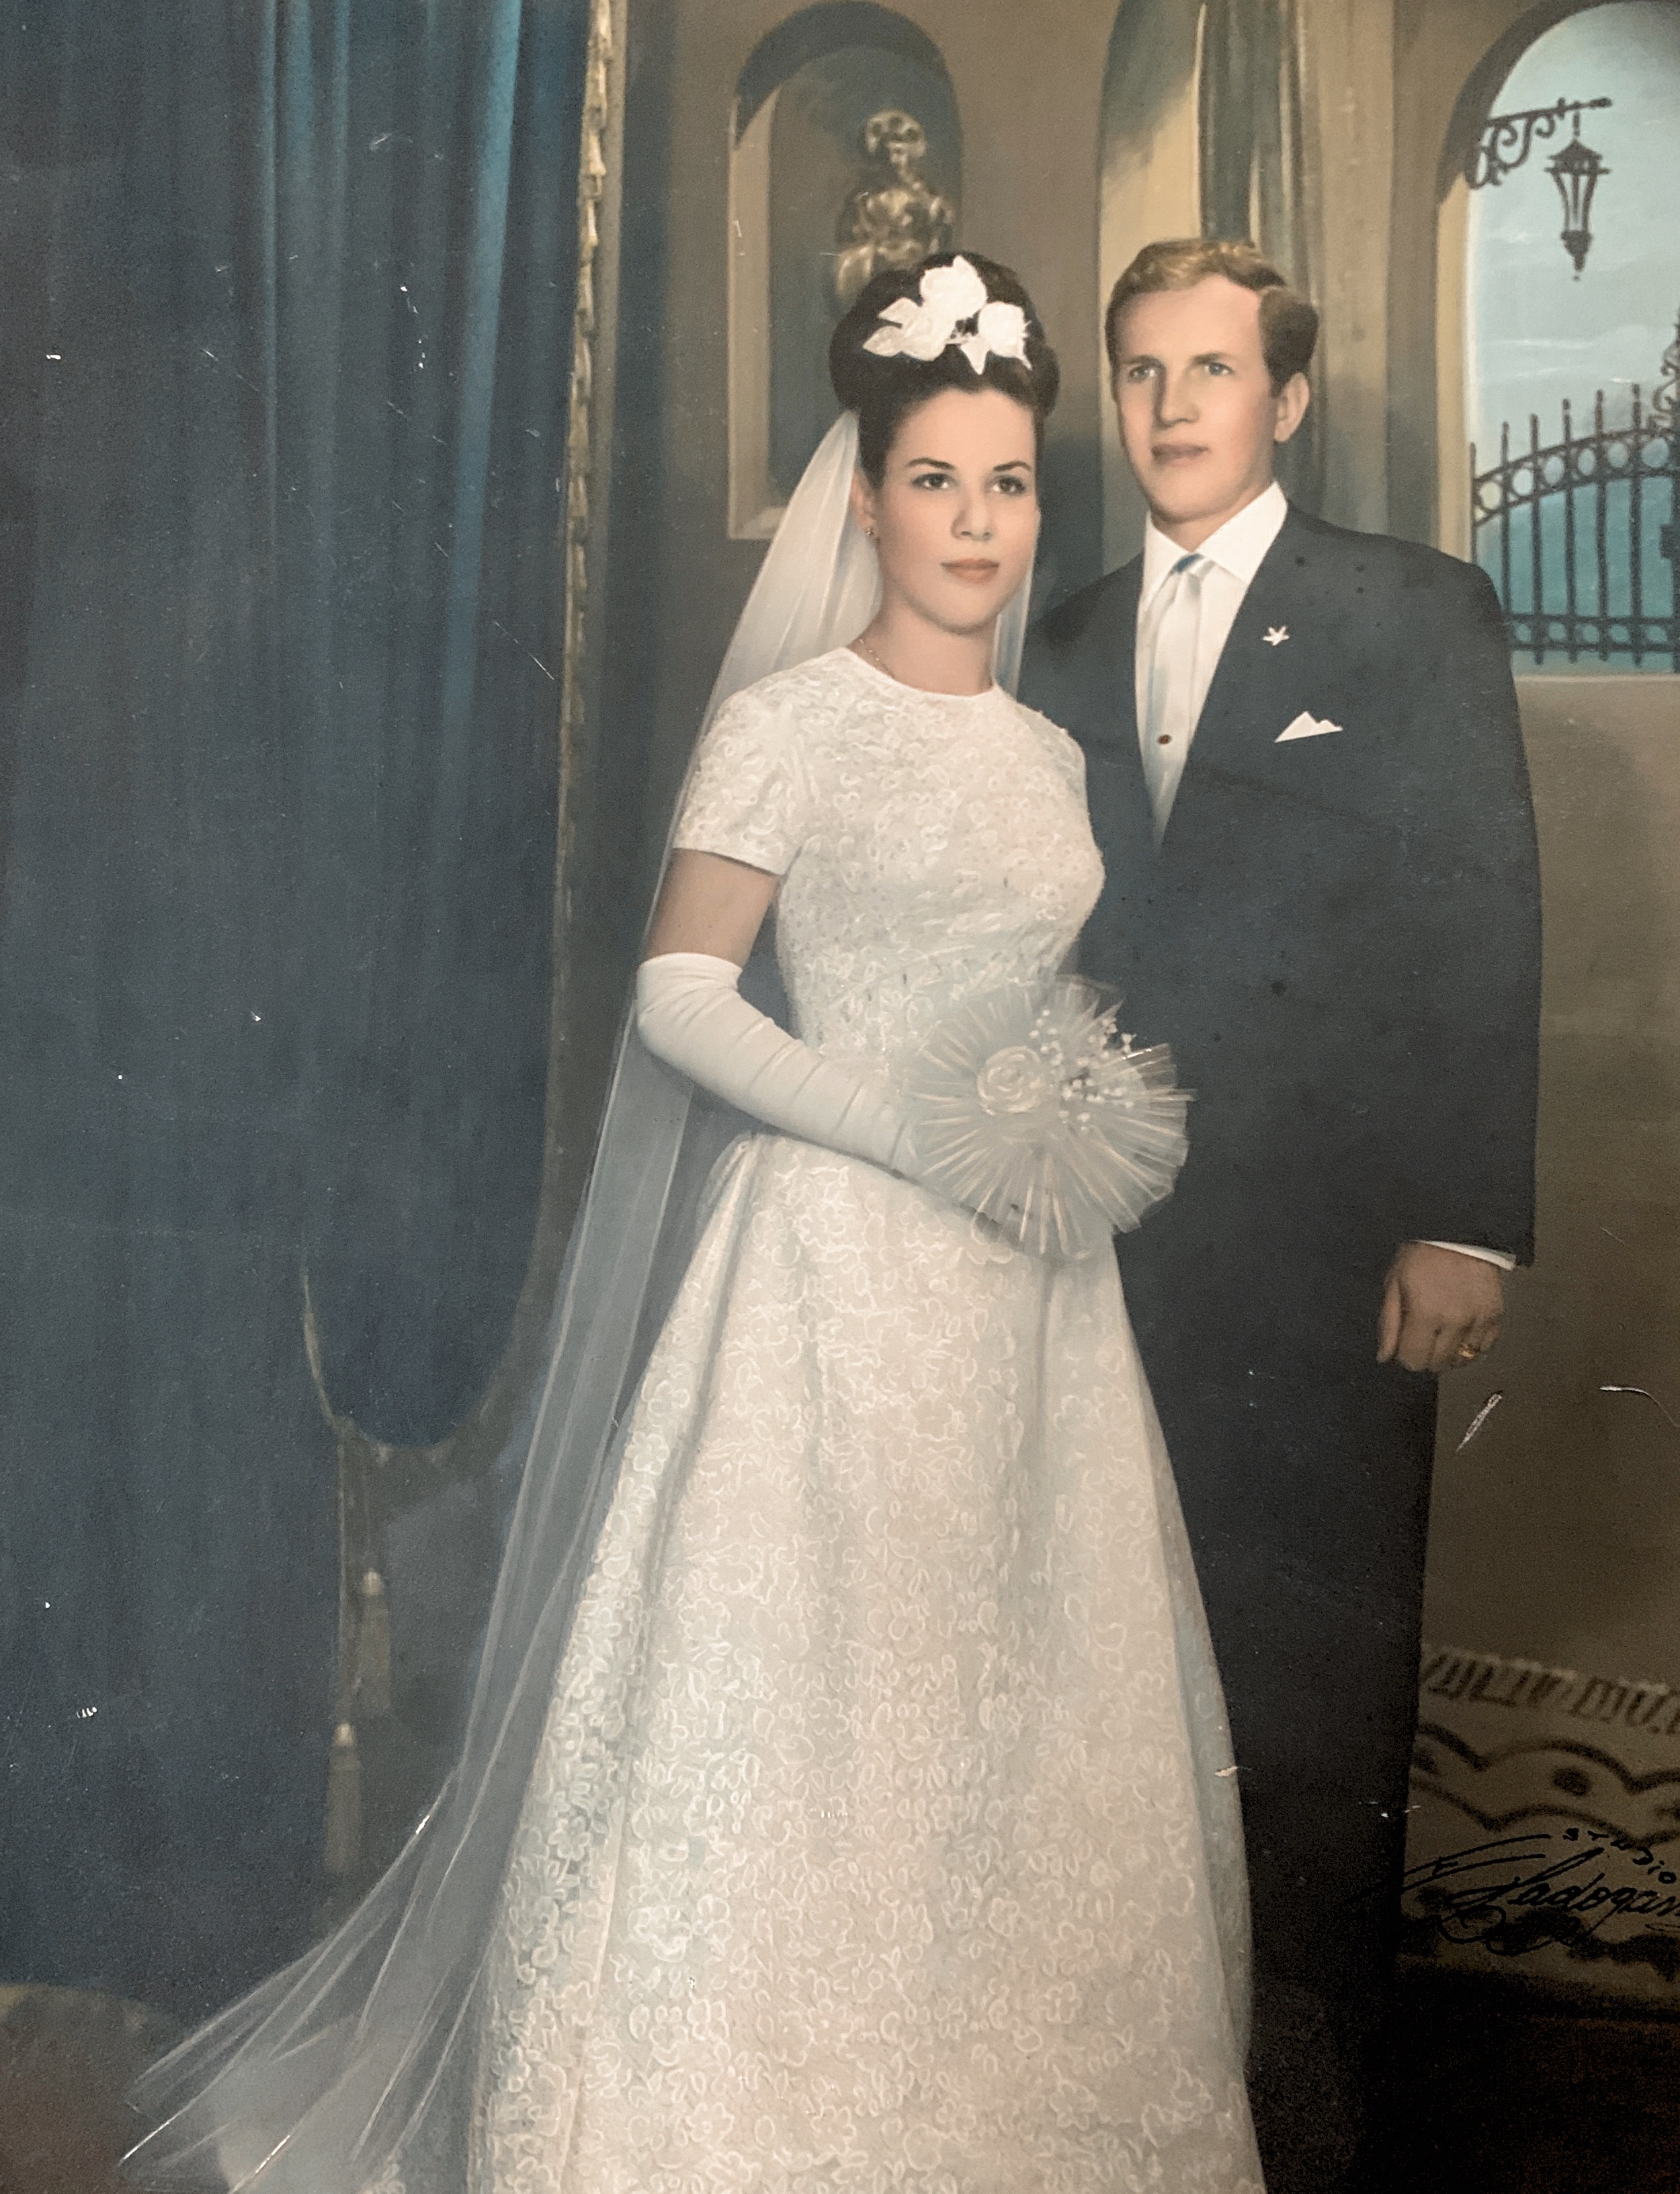 My parents on their wedding day back in Argentina, in the 1960’s